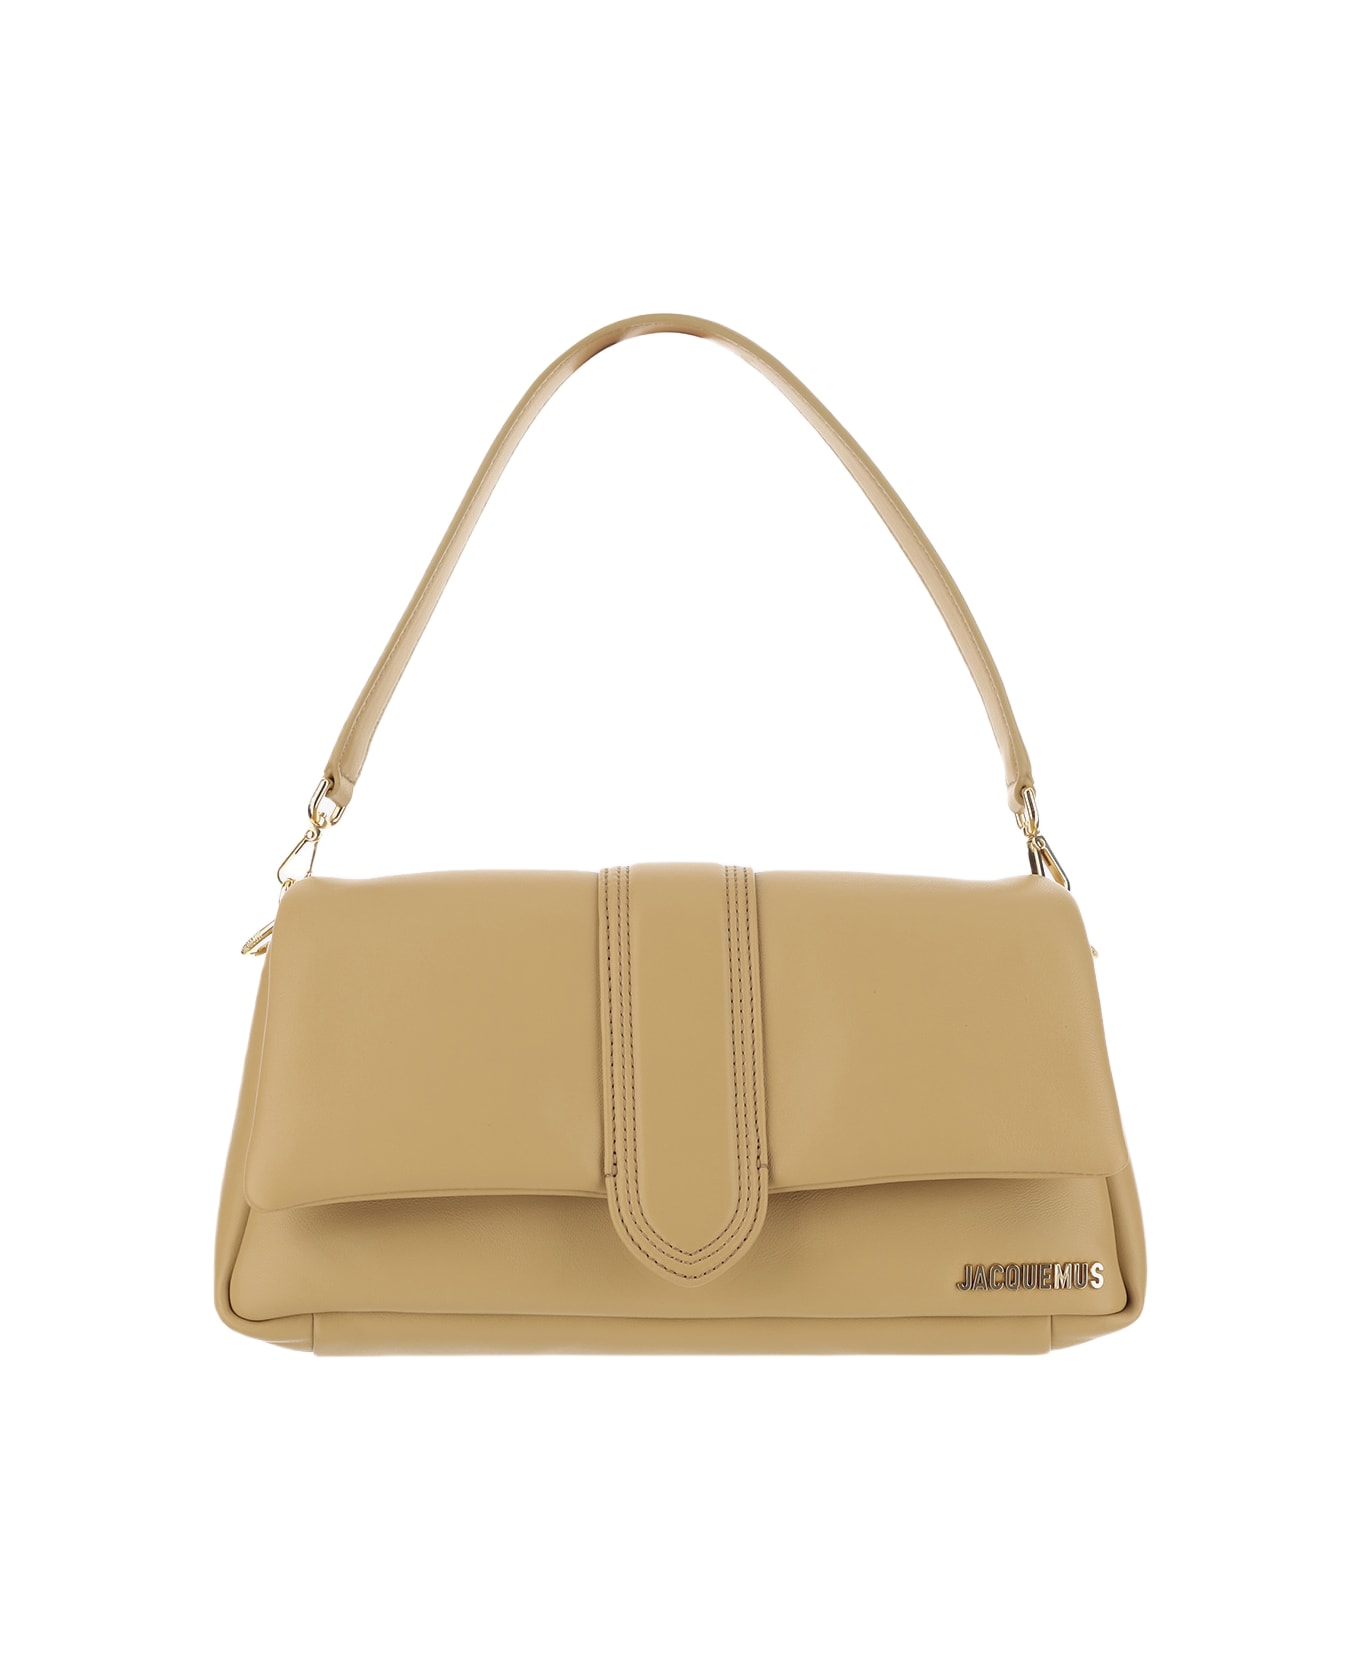 Jacquemus Le Bambimou Leather Shoulder Bag - Brown トートバッグ